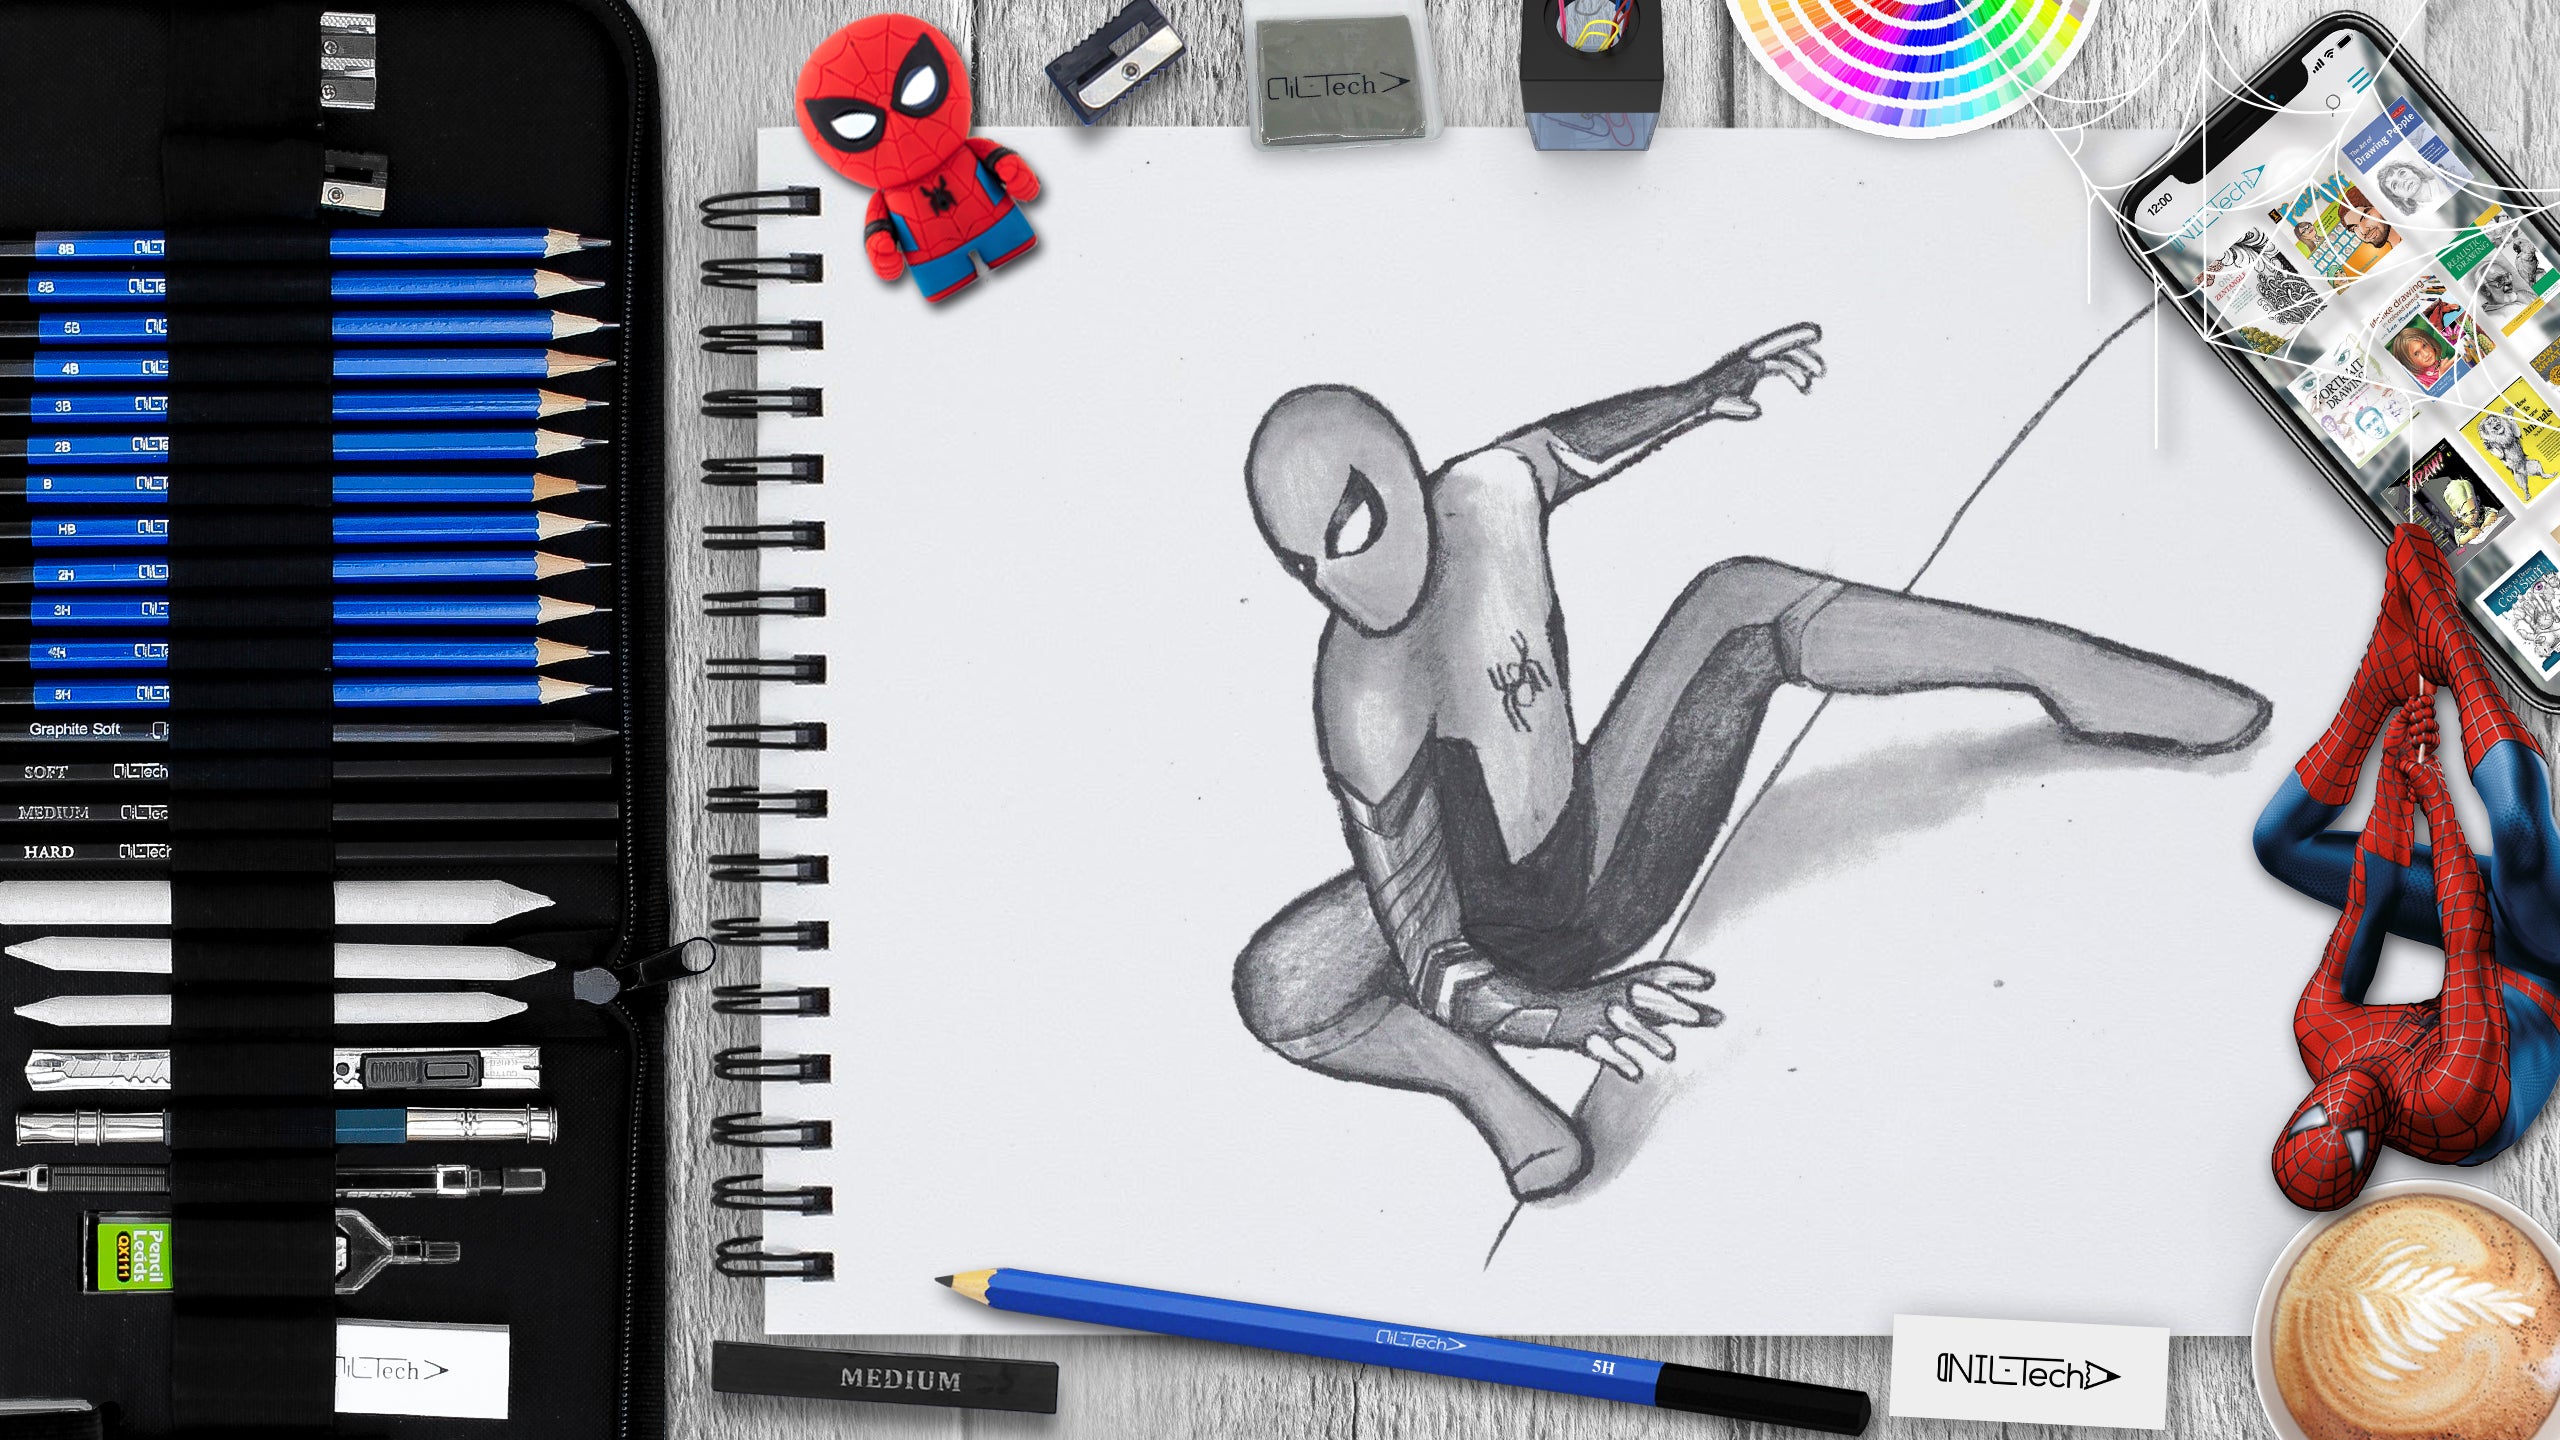 Spider-Man graphite pencil drawing : r/drawing